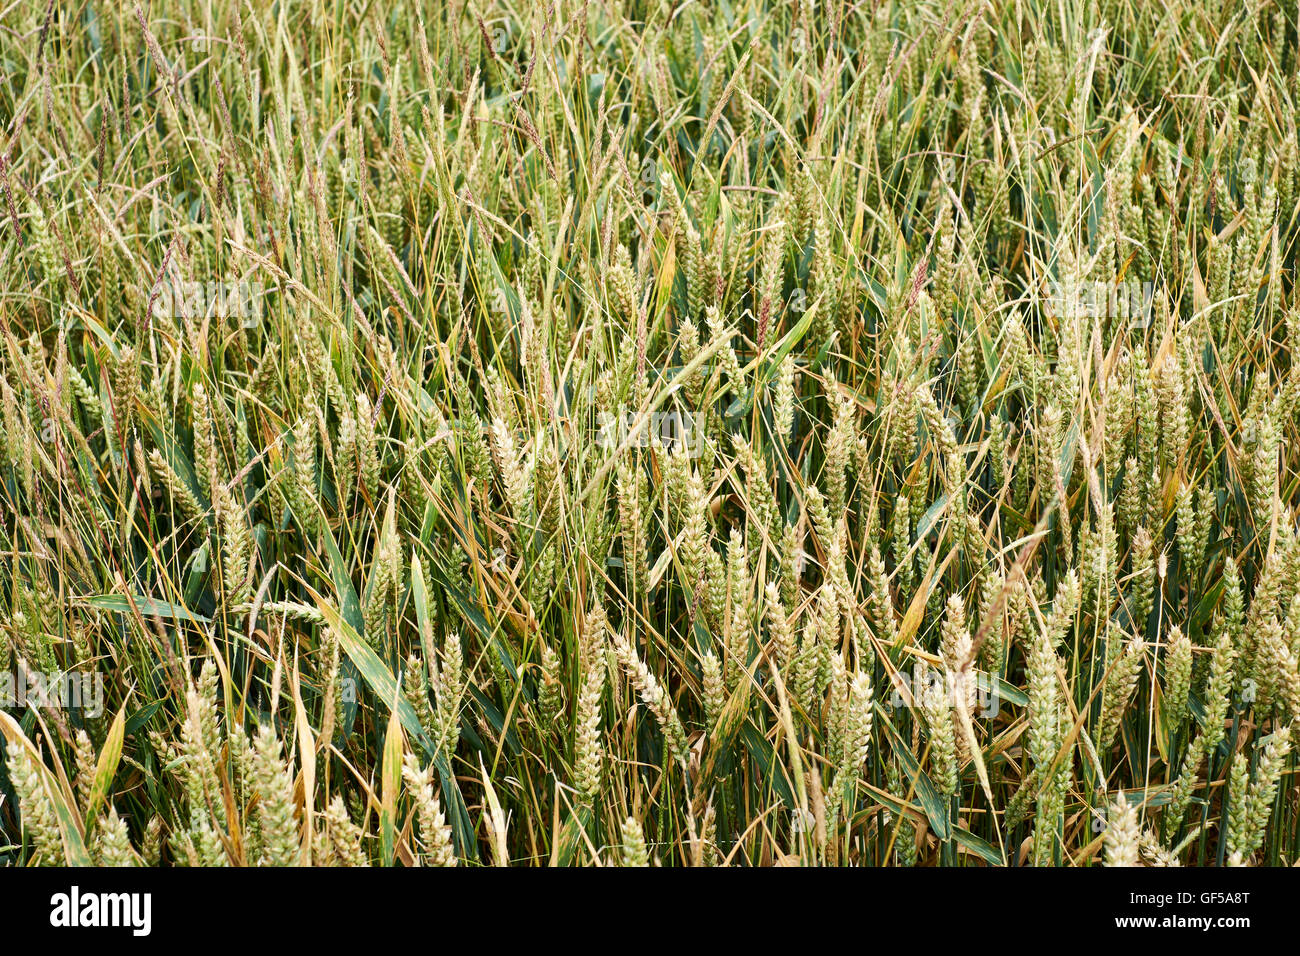 Crop of wheat infested with the Black Grass (Alopecurus myosuroides) weed, England, UK Stock Photo